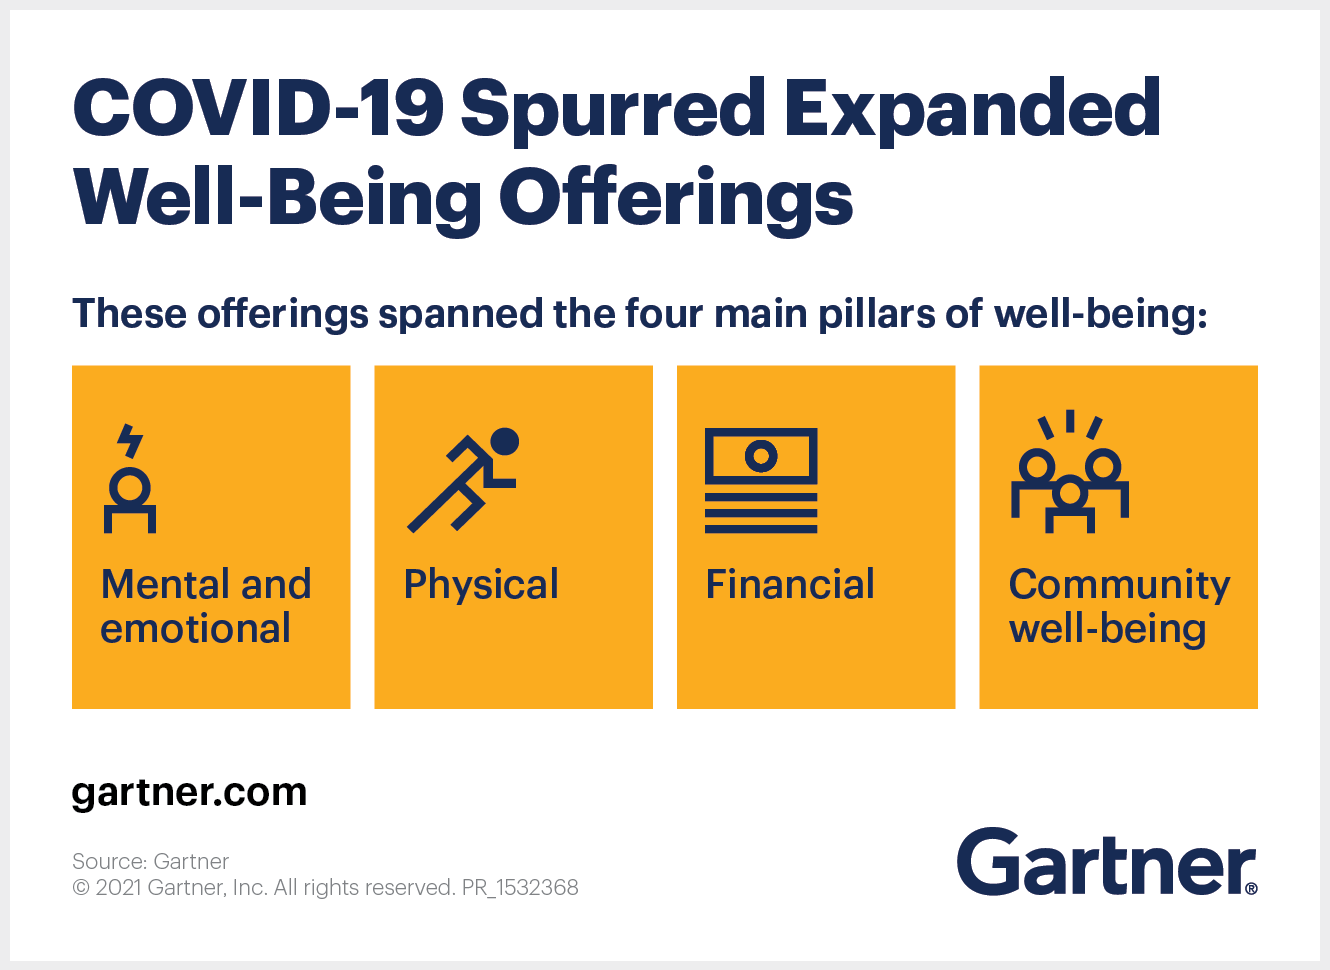 COVID-19 Spurred Expanded Well-Being Offerings